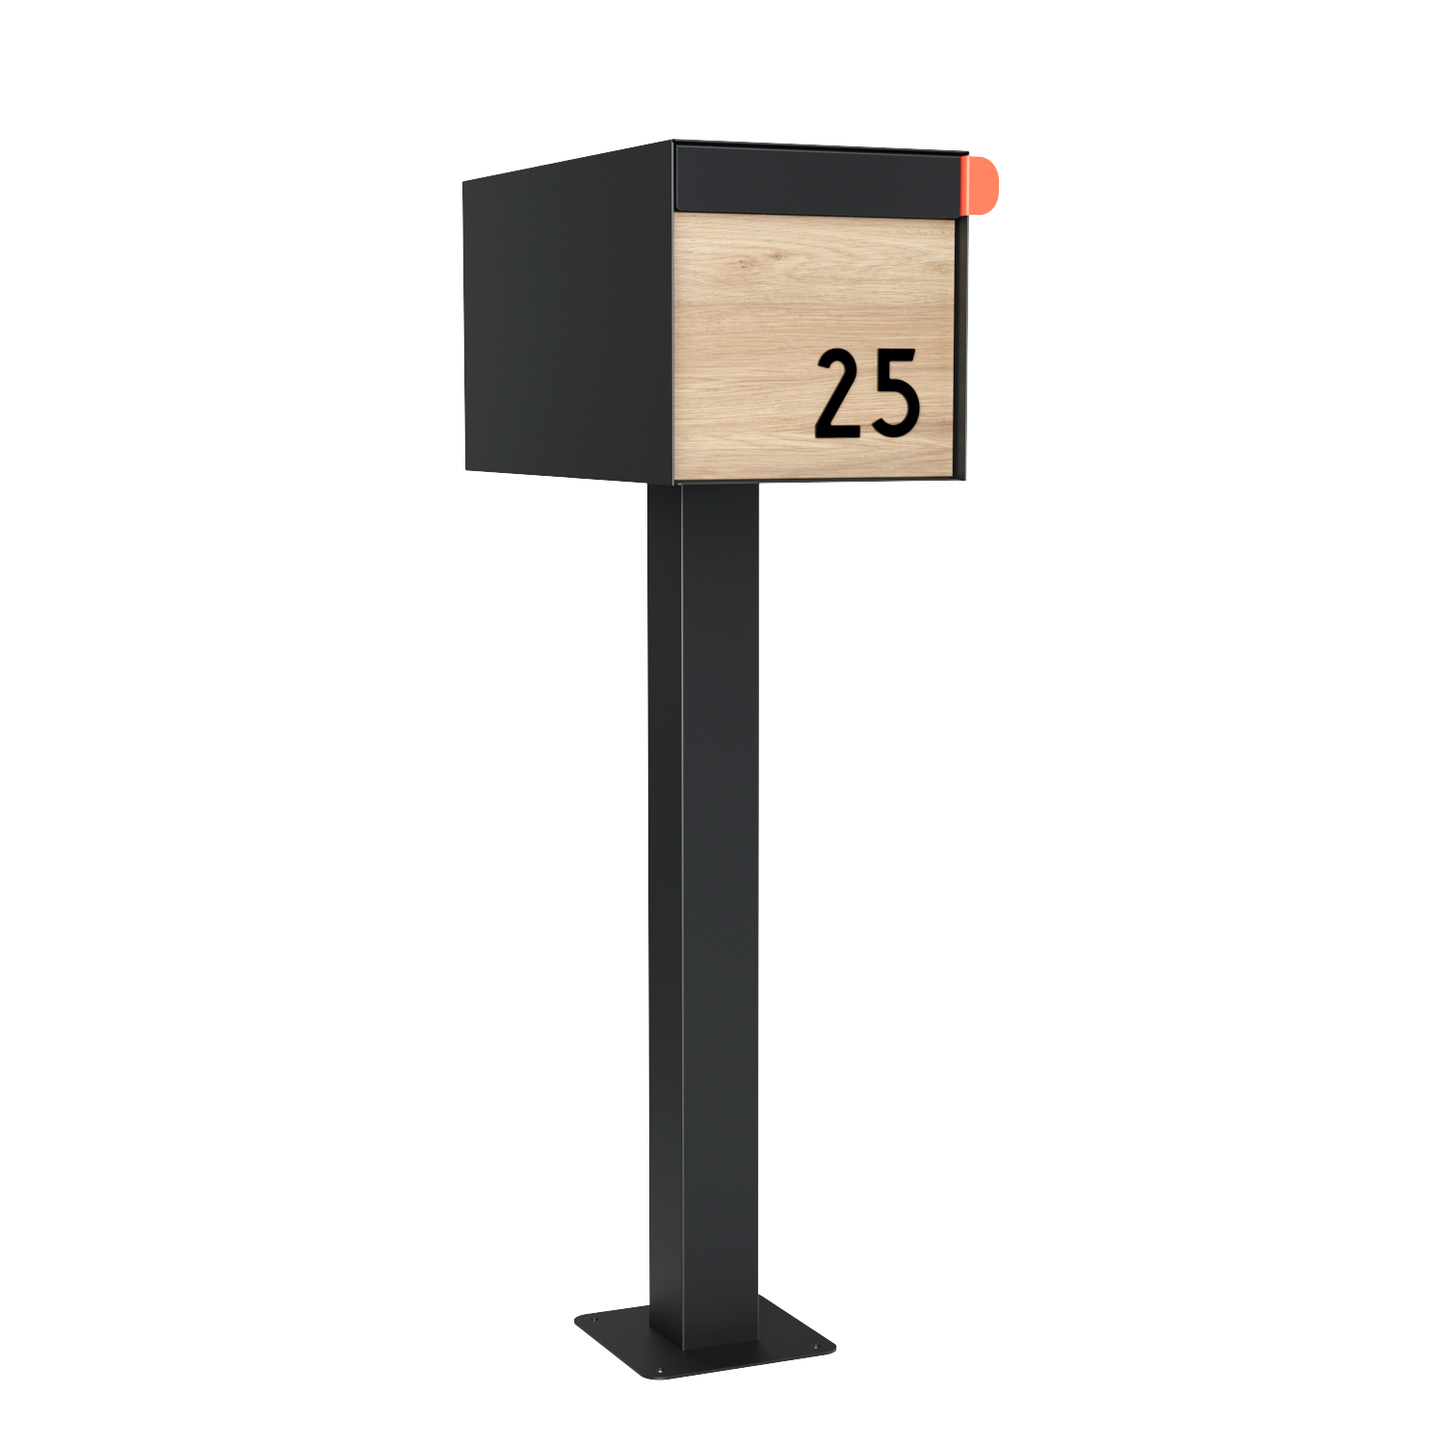 Adhesive street numbers for mailboxes in black